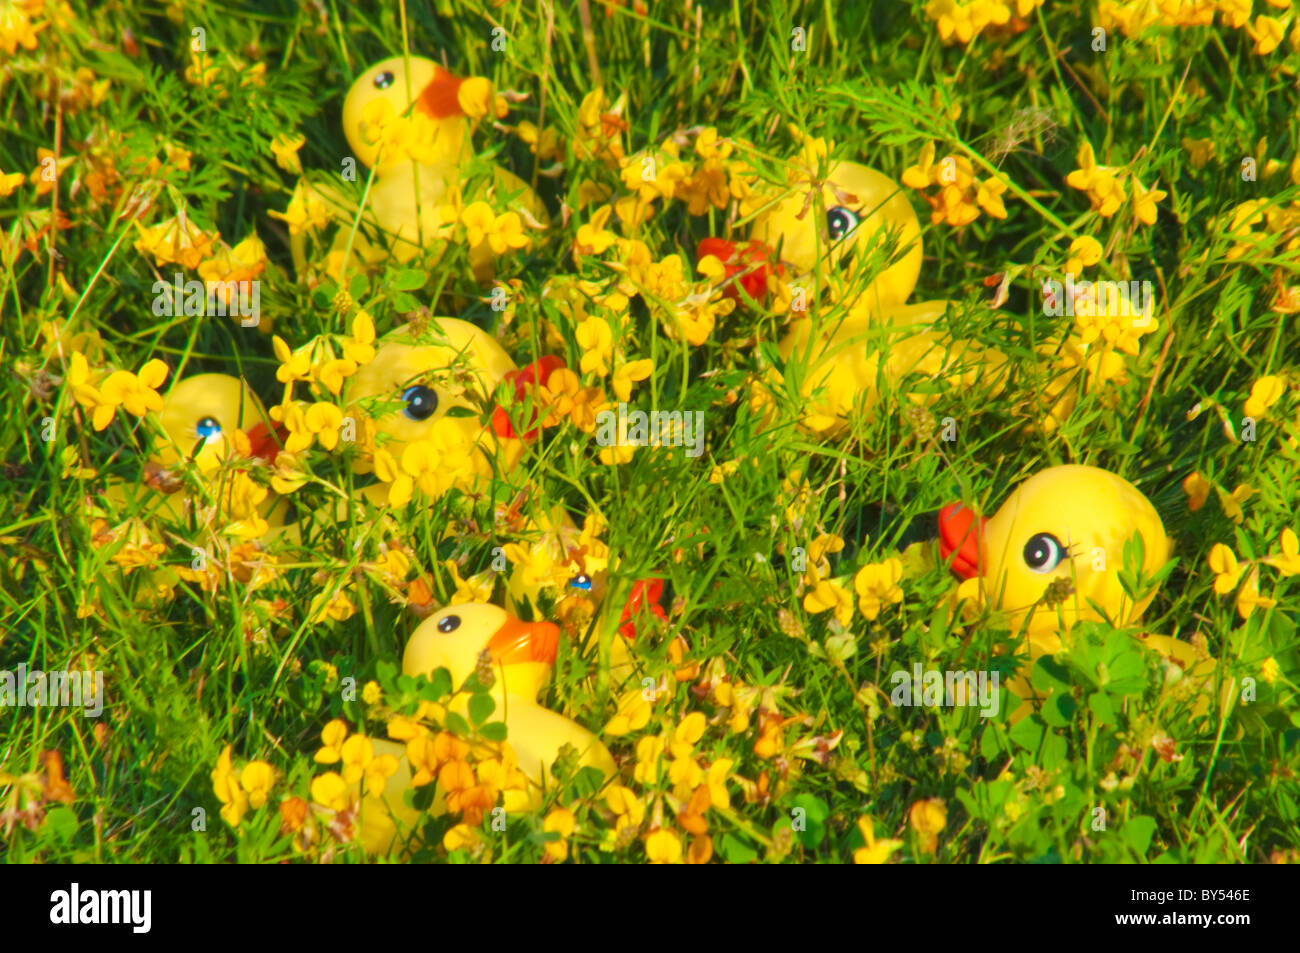 Playing hide and seek. These rubber duckies are well hidden in the flowers. Stock Photo